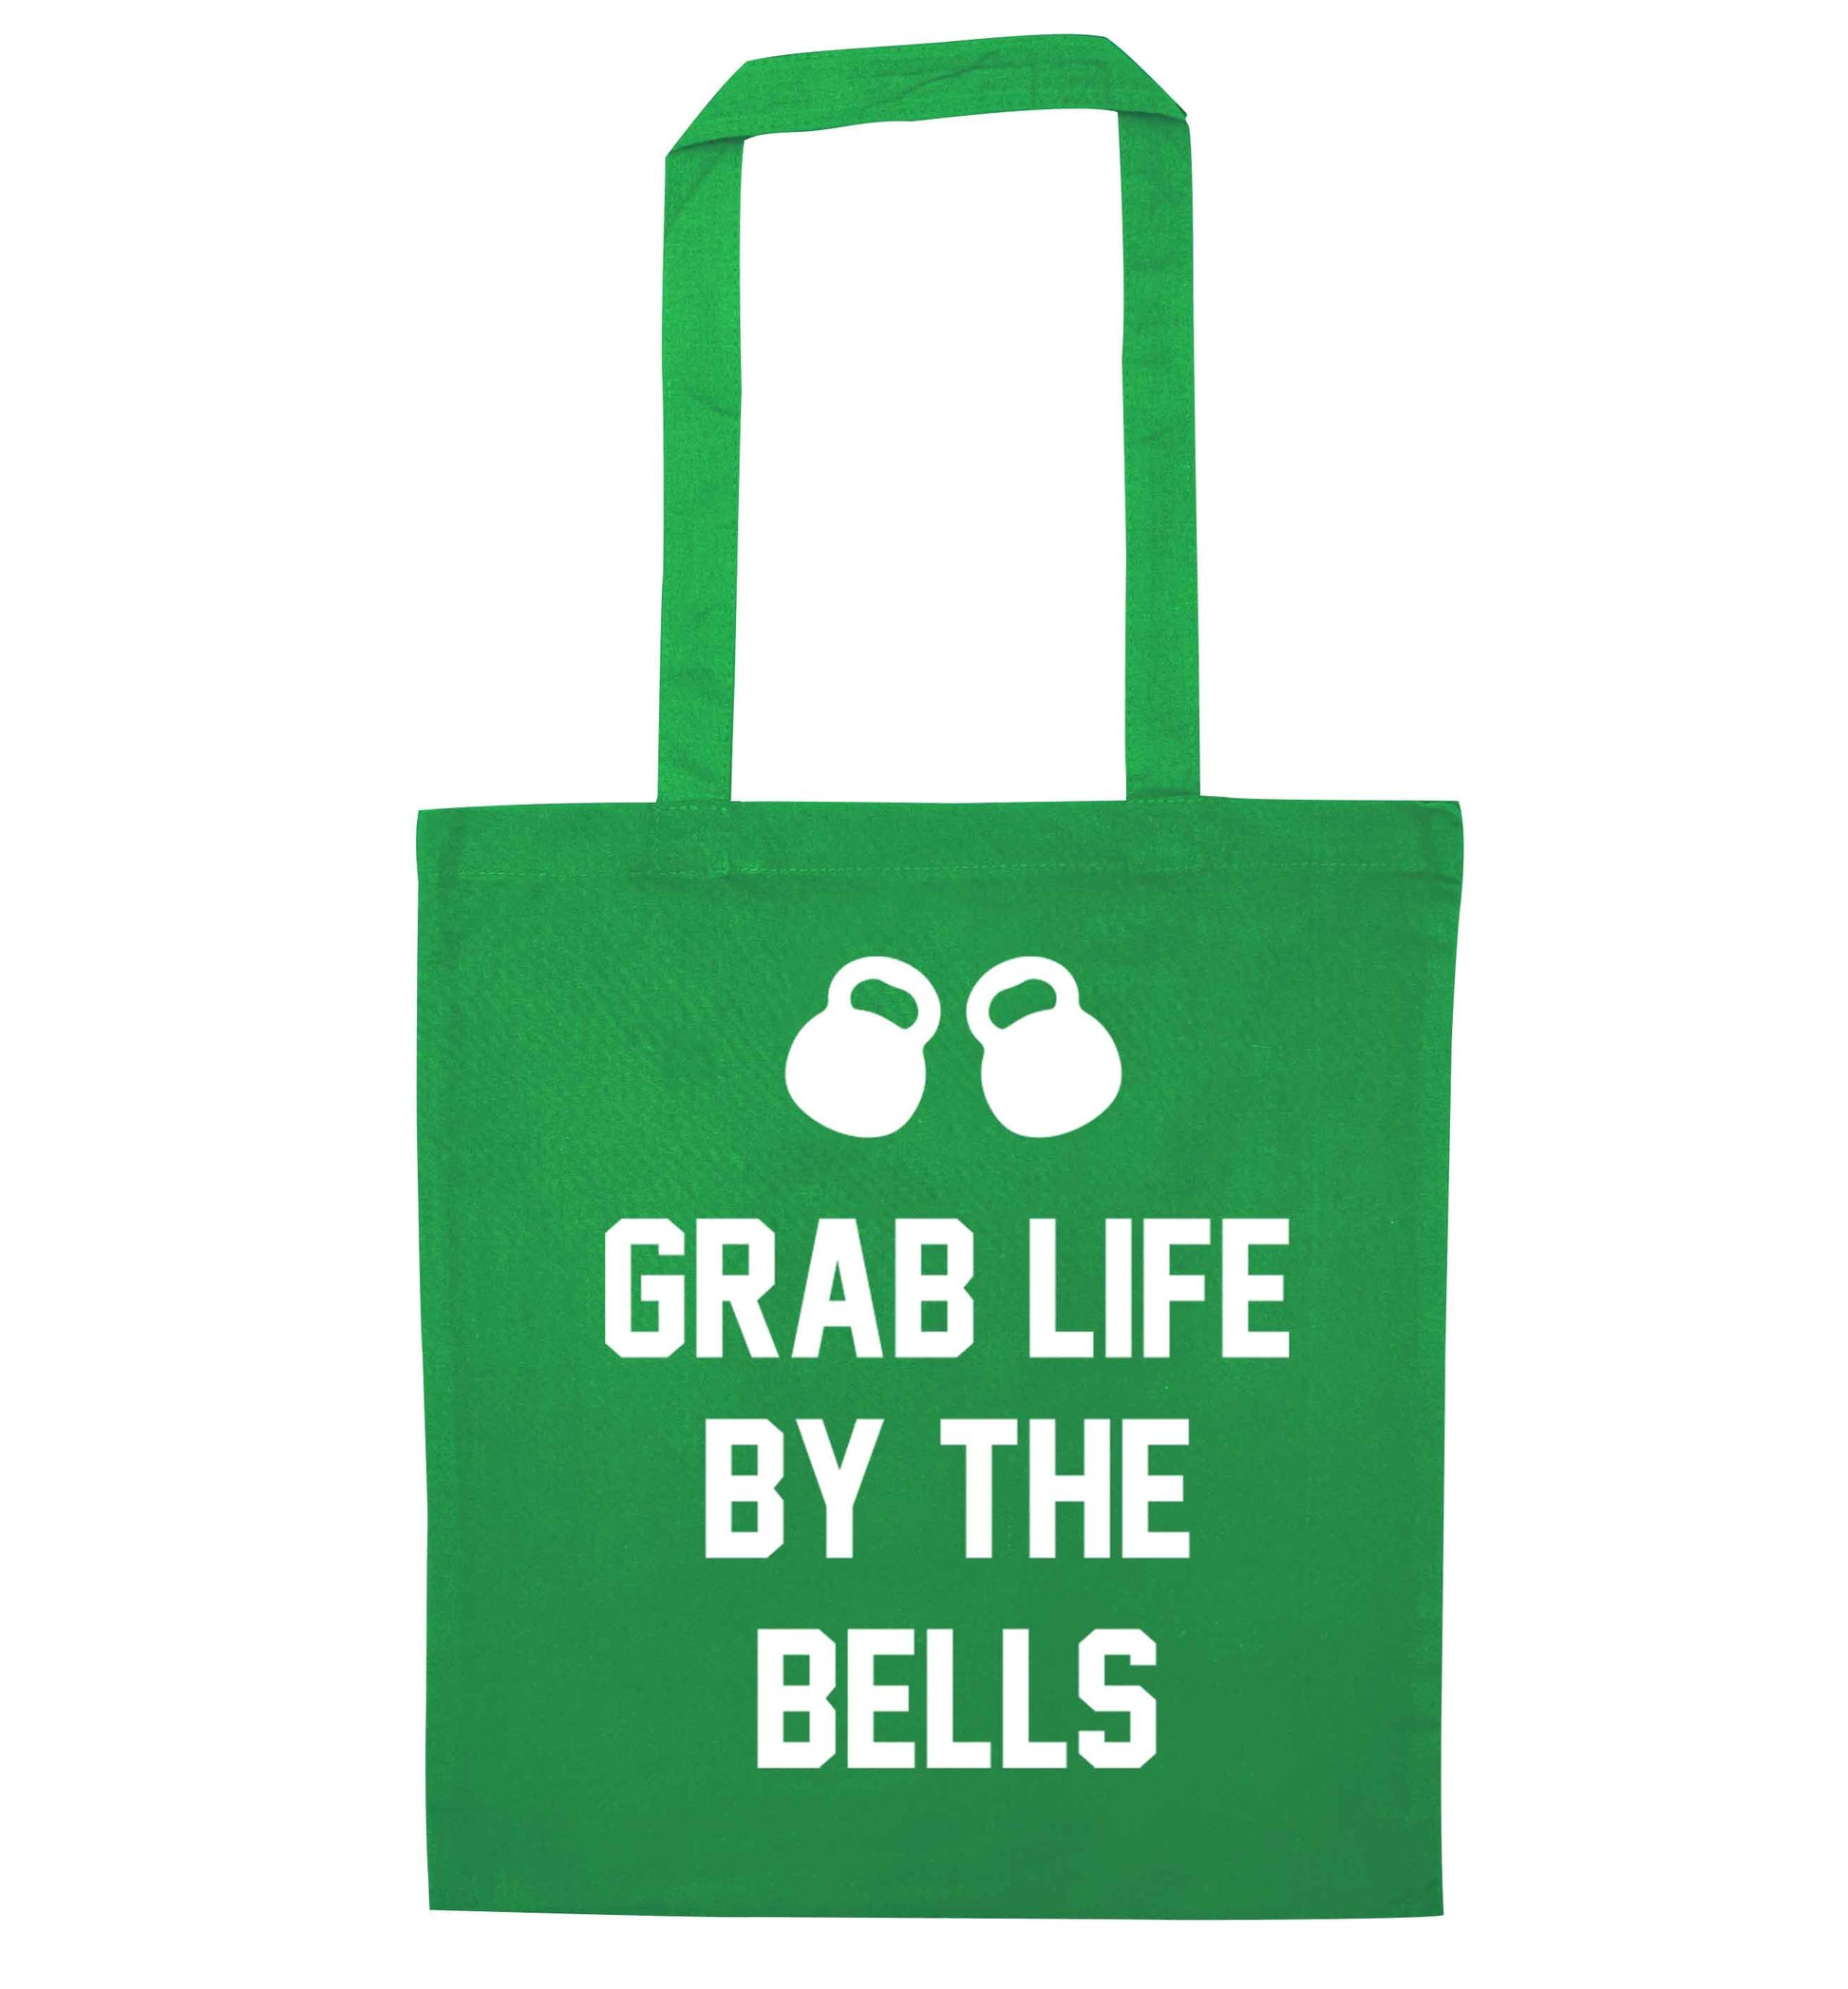 Grab life by the bells green tote bag